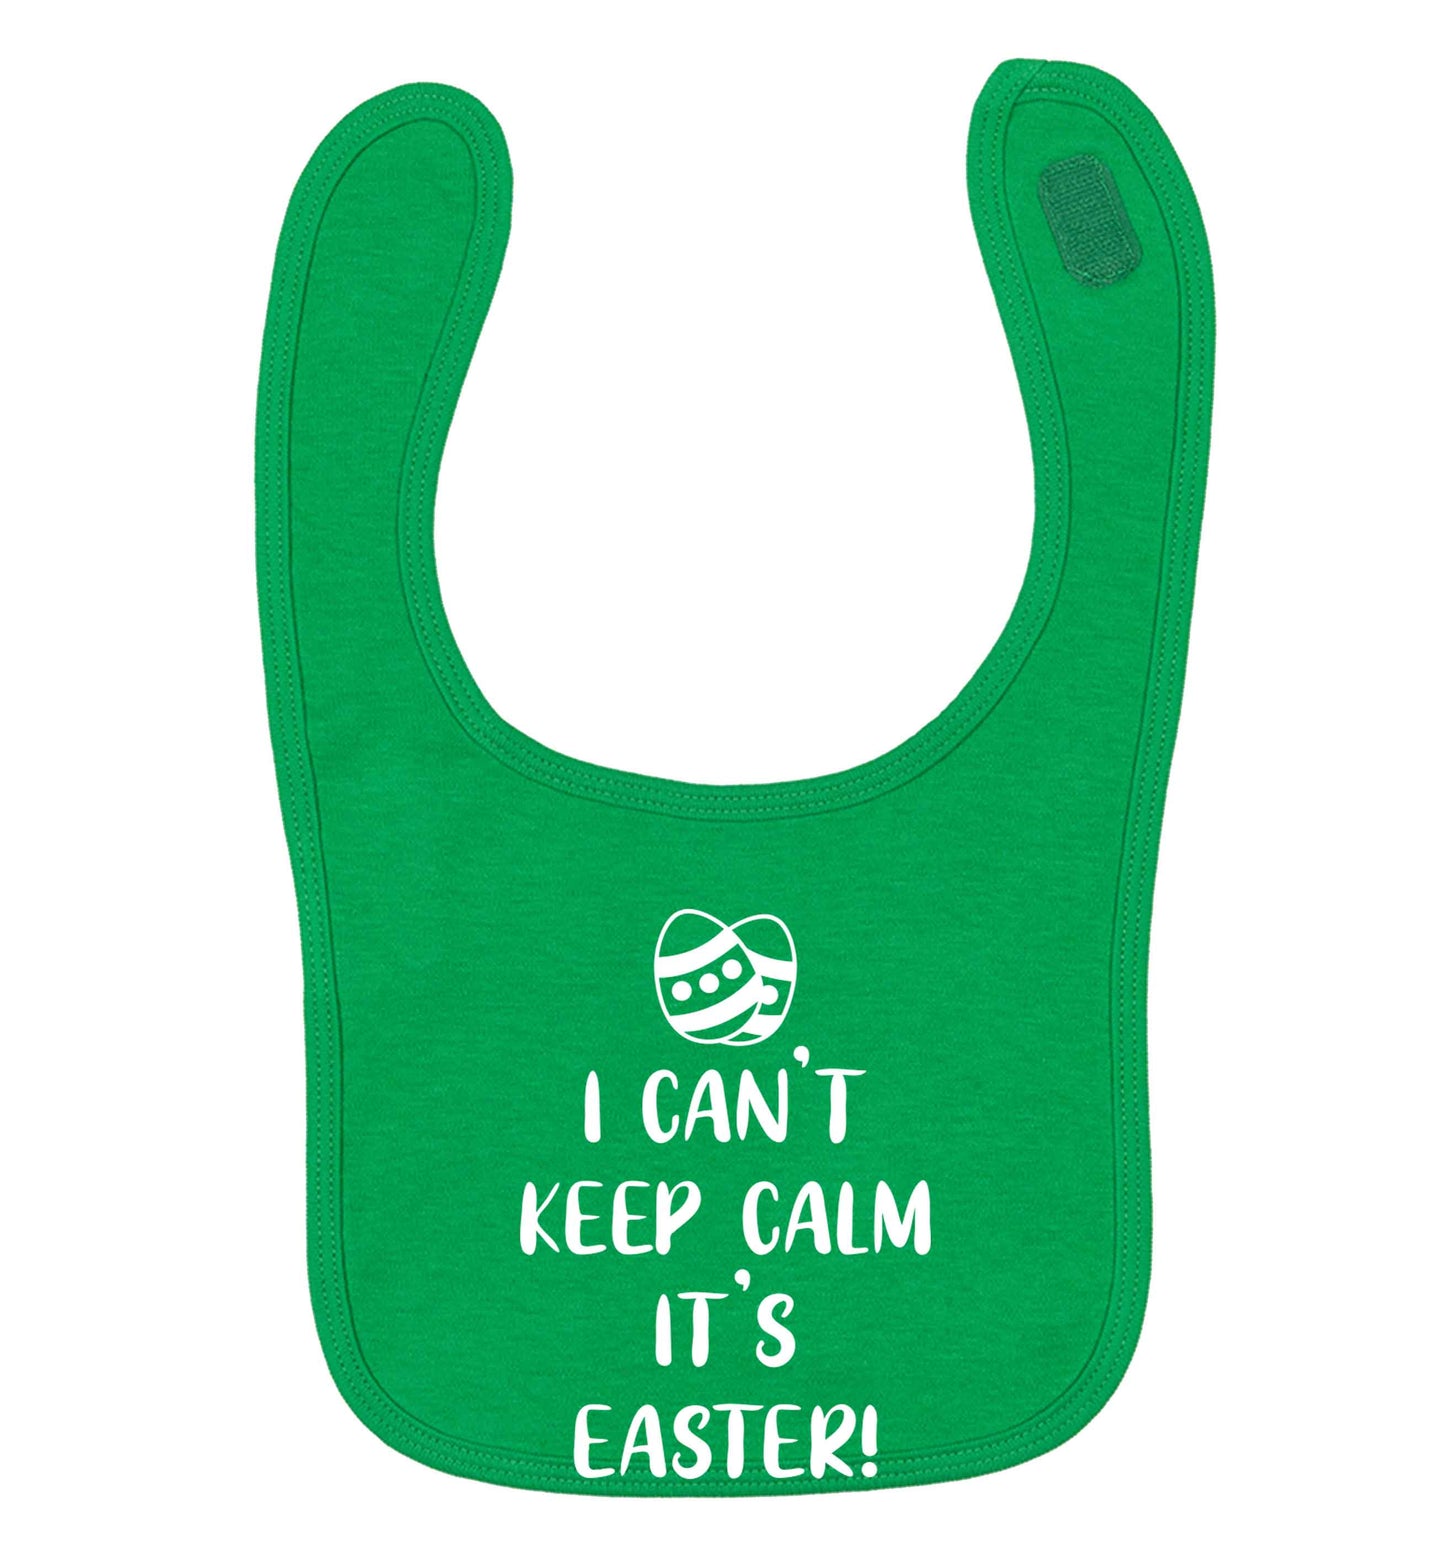 I can't keep calm it's Easter green baby bib